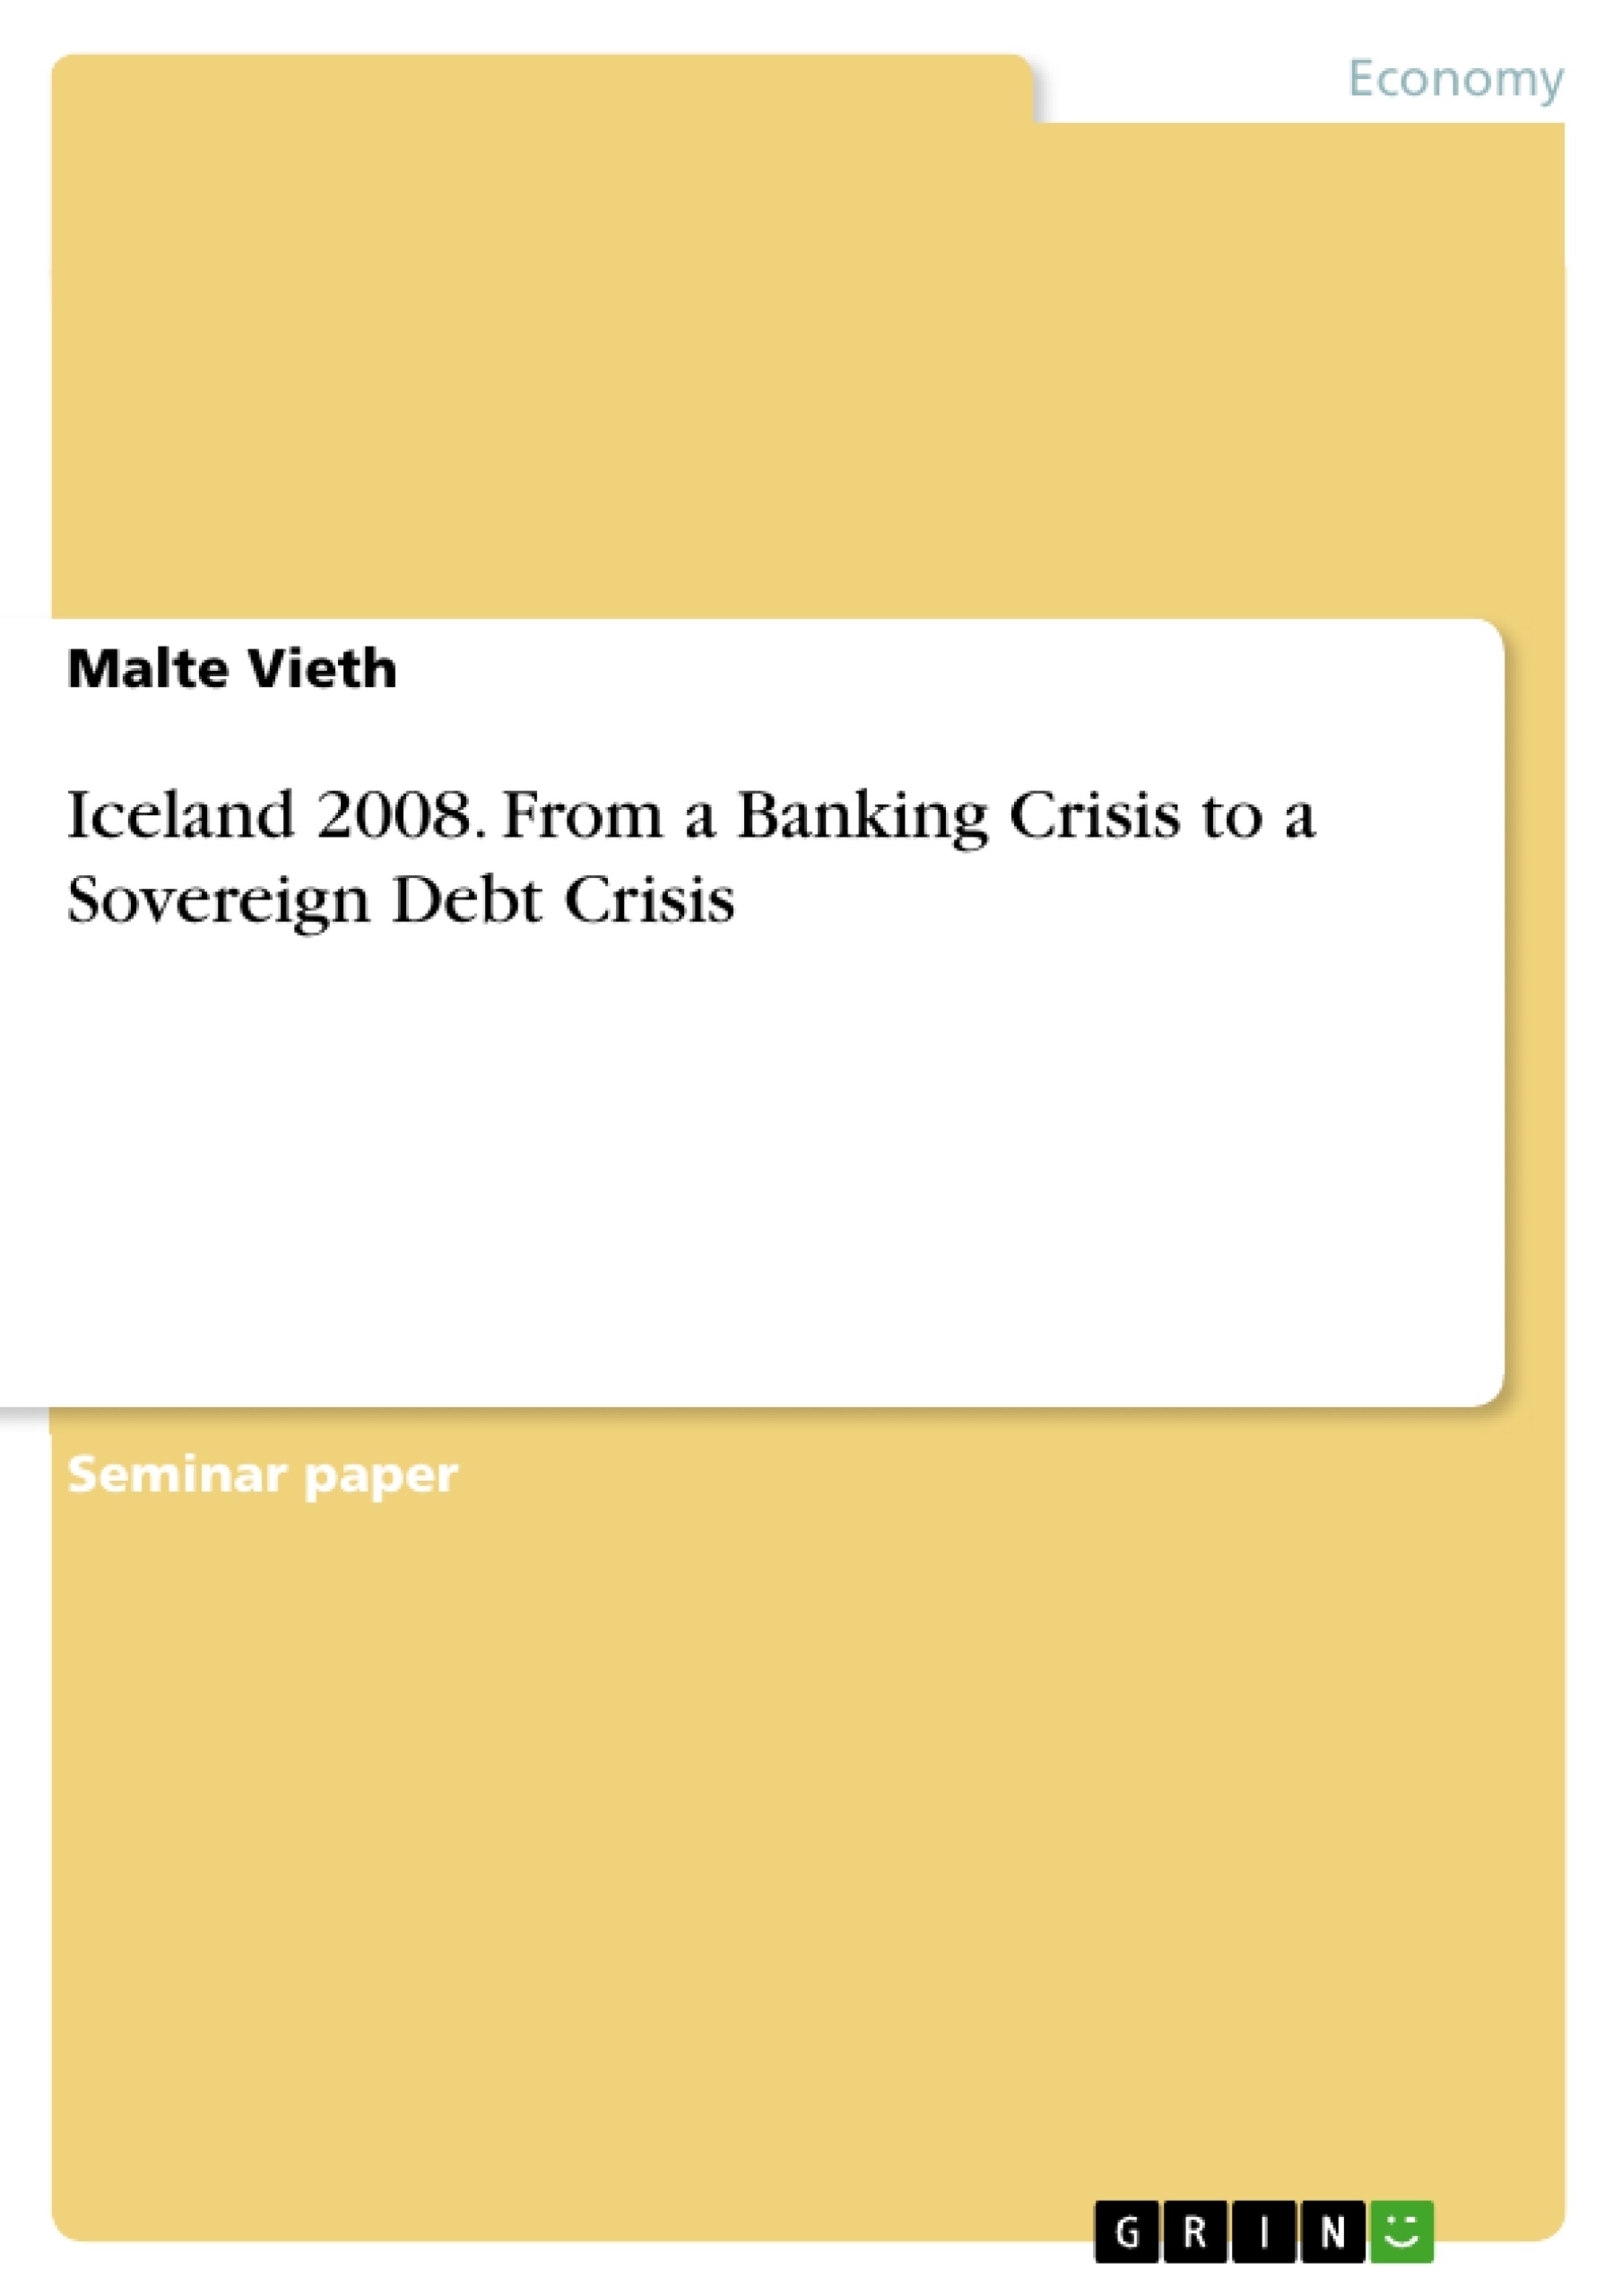 Titre: Iceland 2008. From a Banking Crisis to a Sovereign Debt Crisis